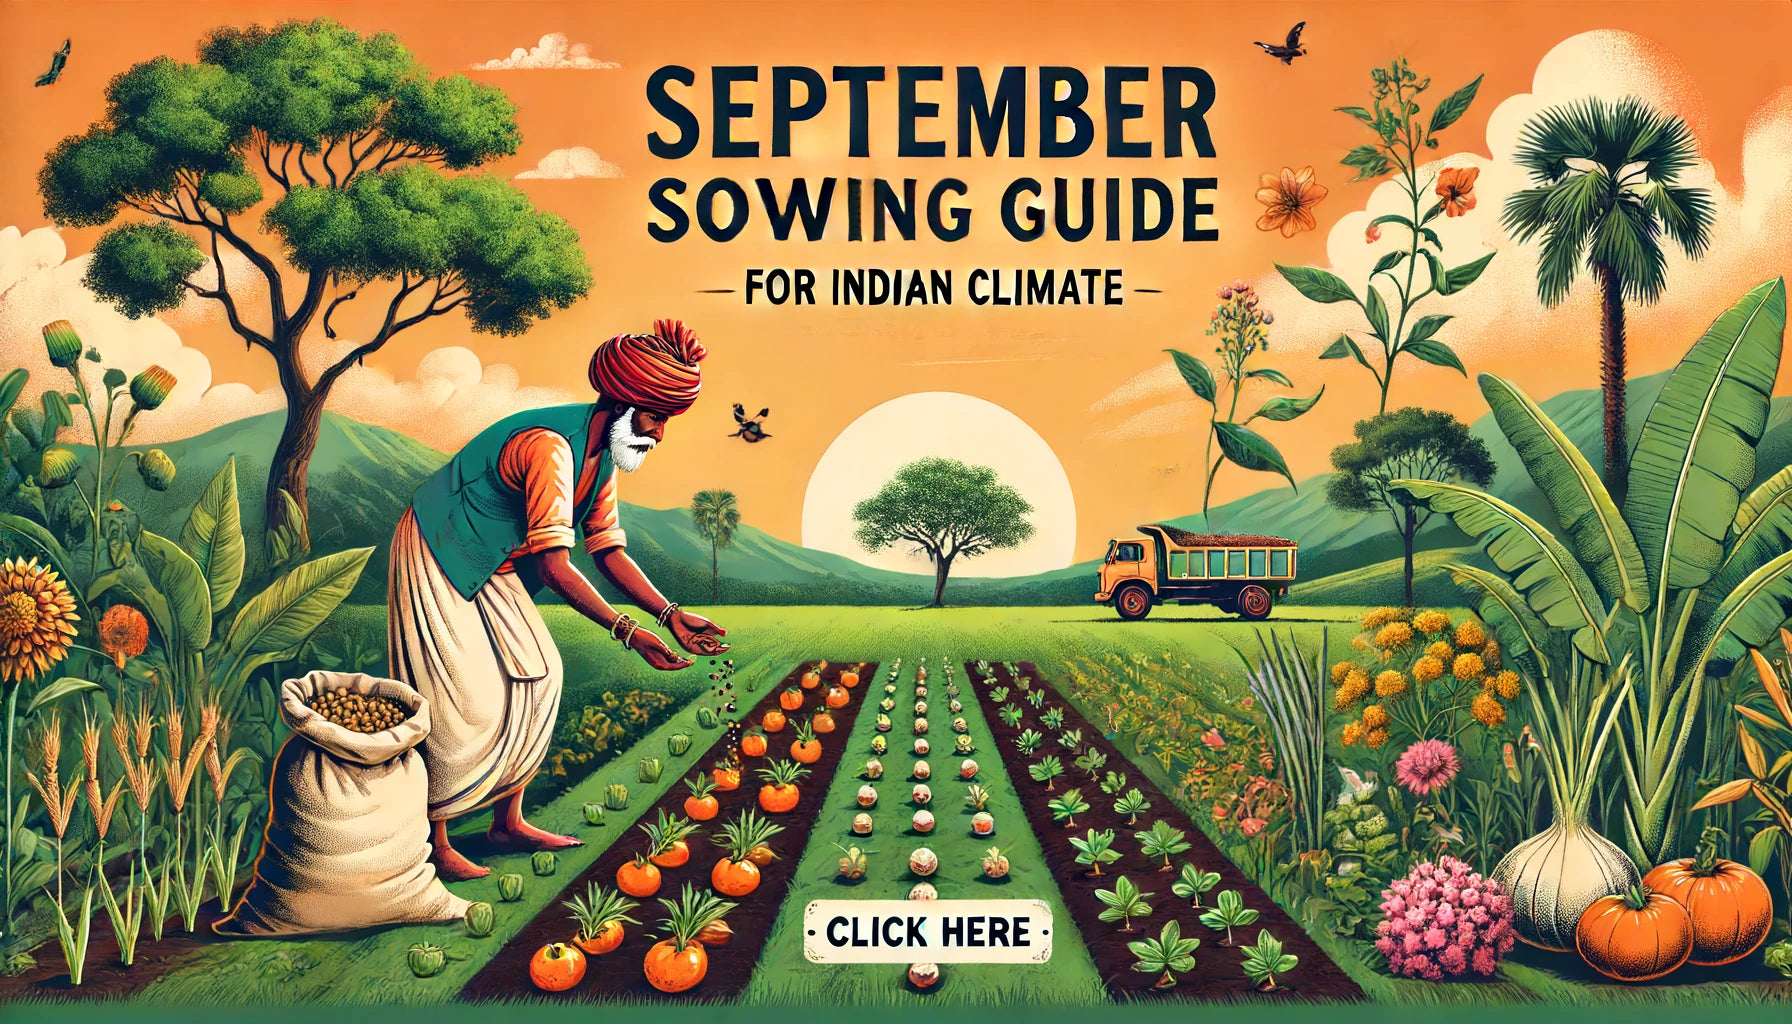 September Sowing Guide for Vegetables, Flowers, and Exotic Herbs in Indian Climate